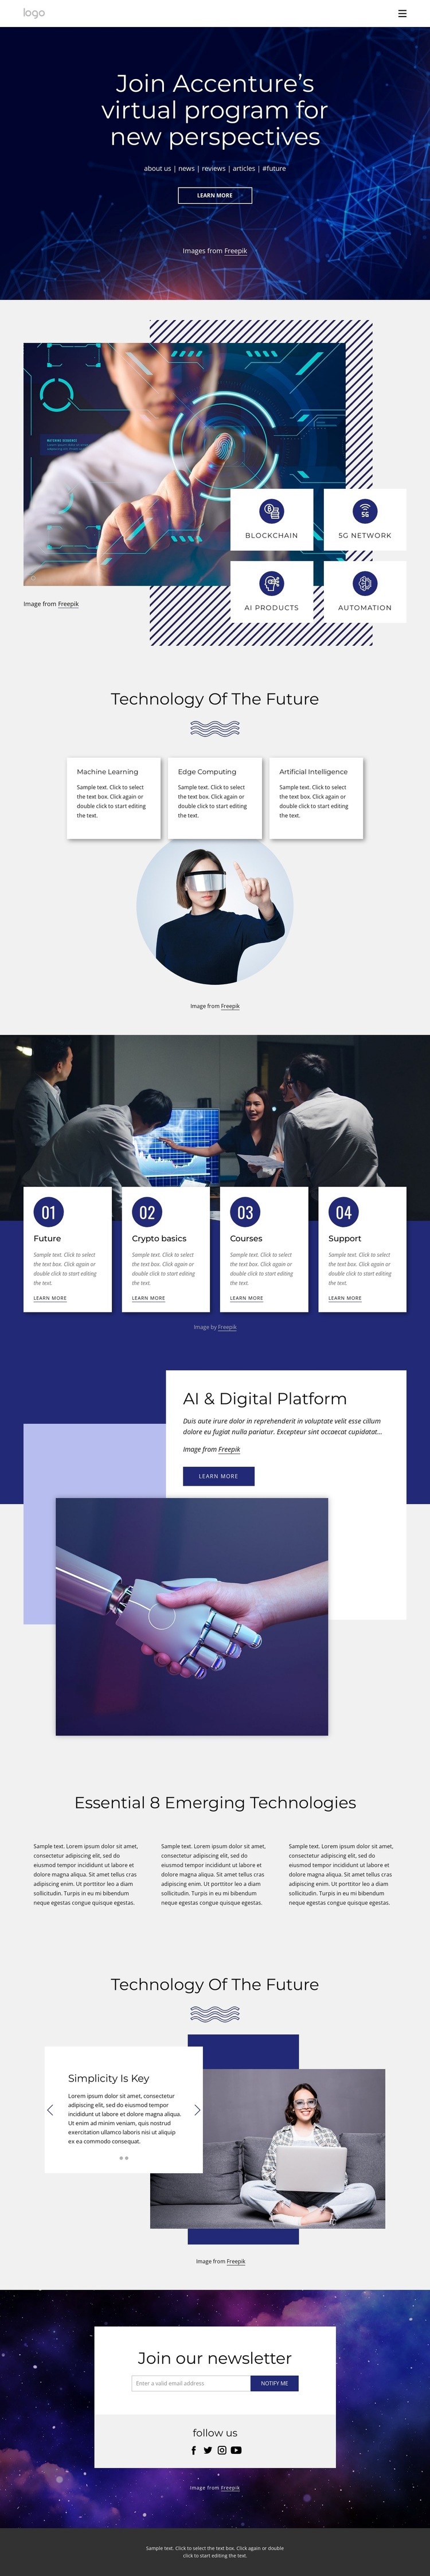 New technology perspectives Homepage Design